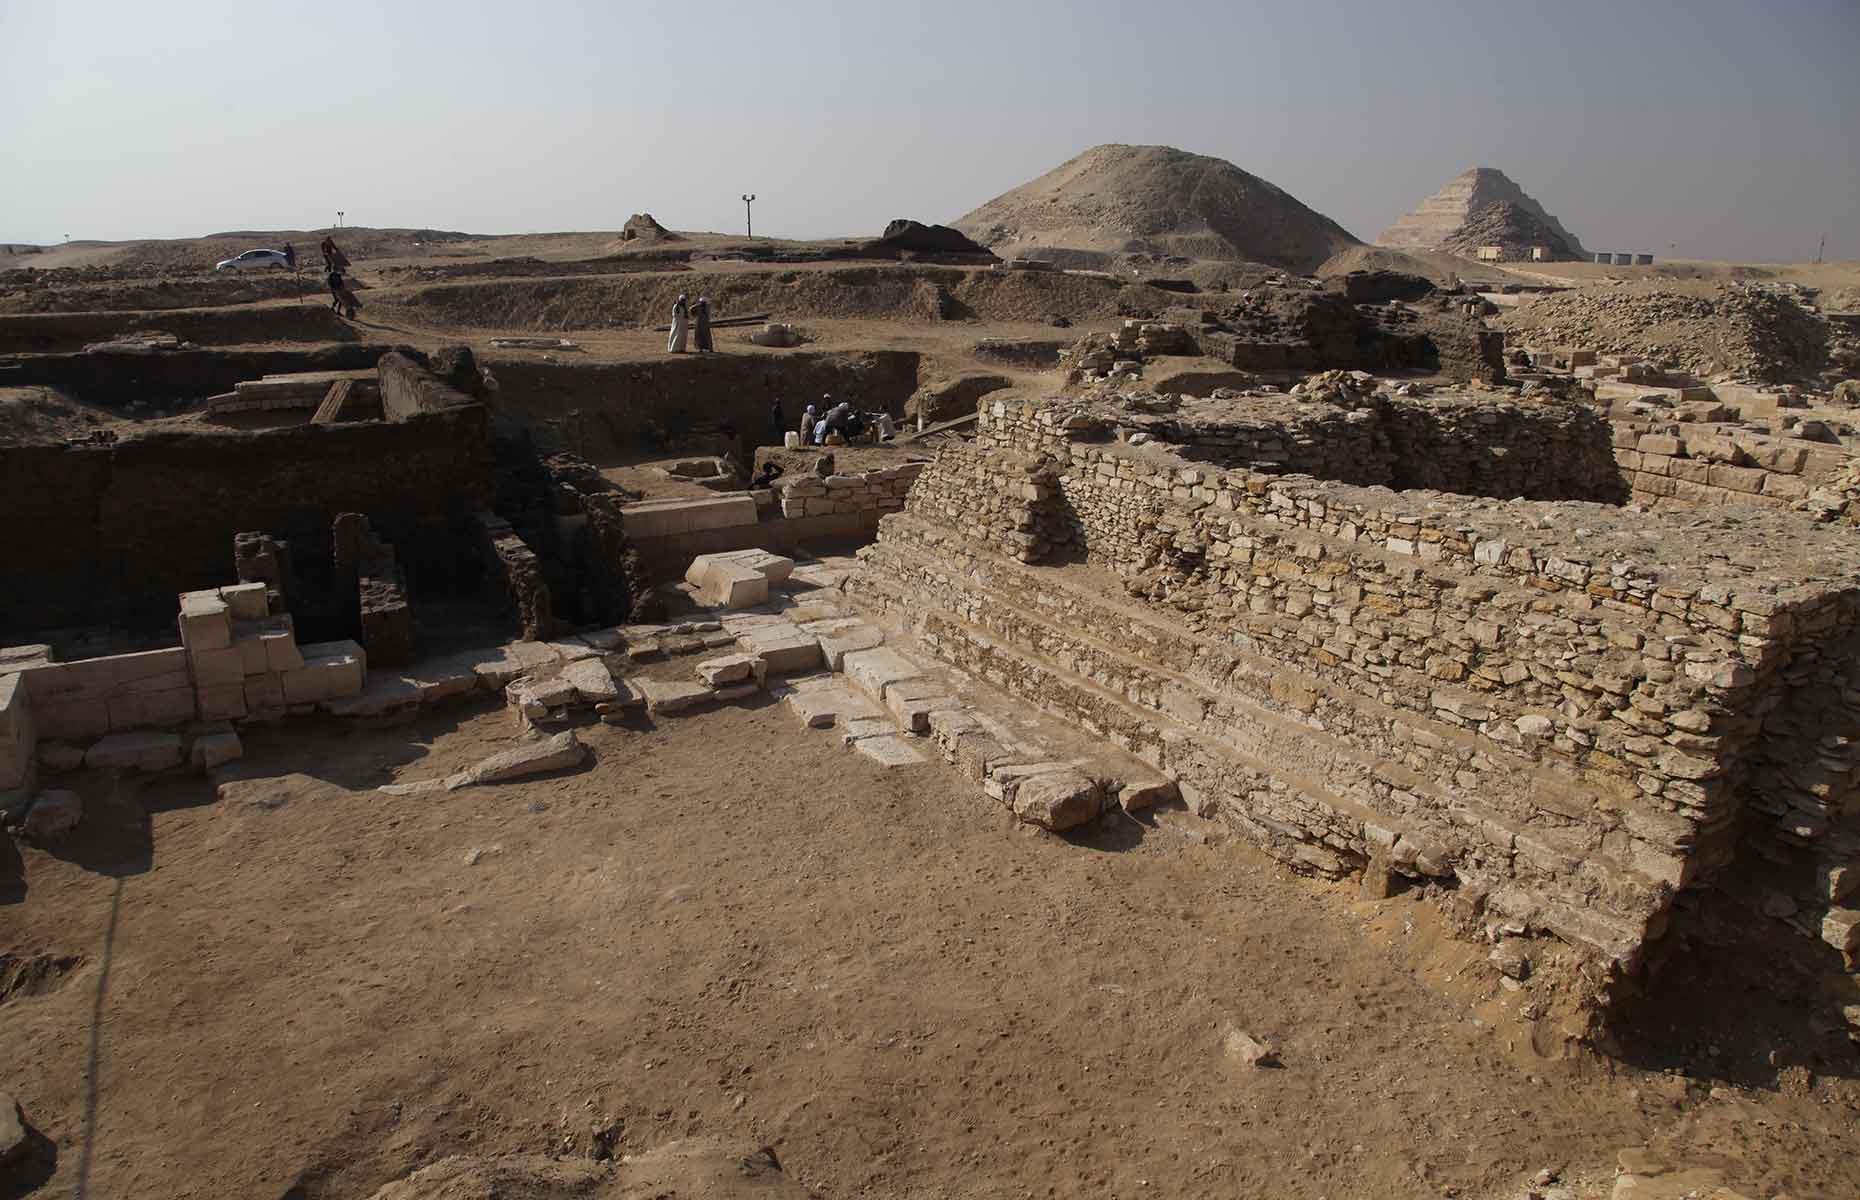 <p>Archaeologists also uncovered the pyramid of a previously unknown Egyptian queen named Neith. Pictured here is the excavated site, with the Teti and Djoser pyramids visible in the background. Neith was likely named after the Egyptian <a href="http://egyptianmuseum.org/deities-neith">goddess</a> of creation, wisdom, weaving and war, as well as being worshipped as a funerary goddess.</p>  <p><strong>Read on to discover more mysterious treasures recovered from Egypt's royal tombs...</strong></p>